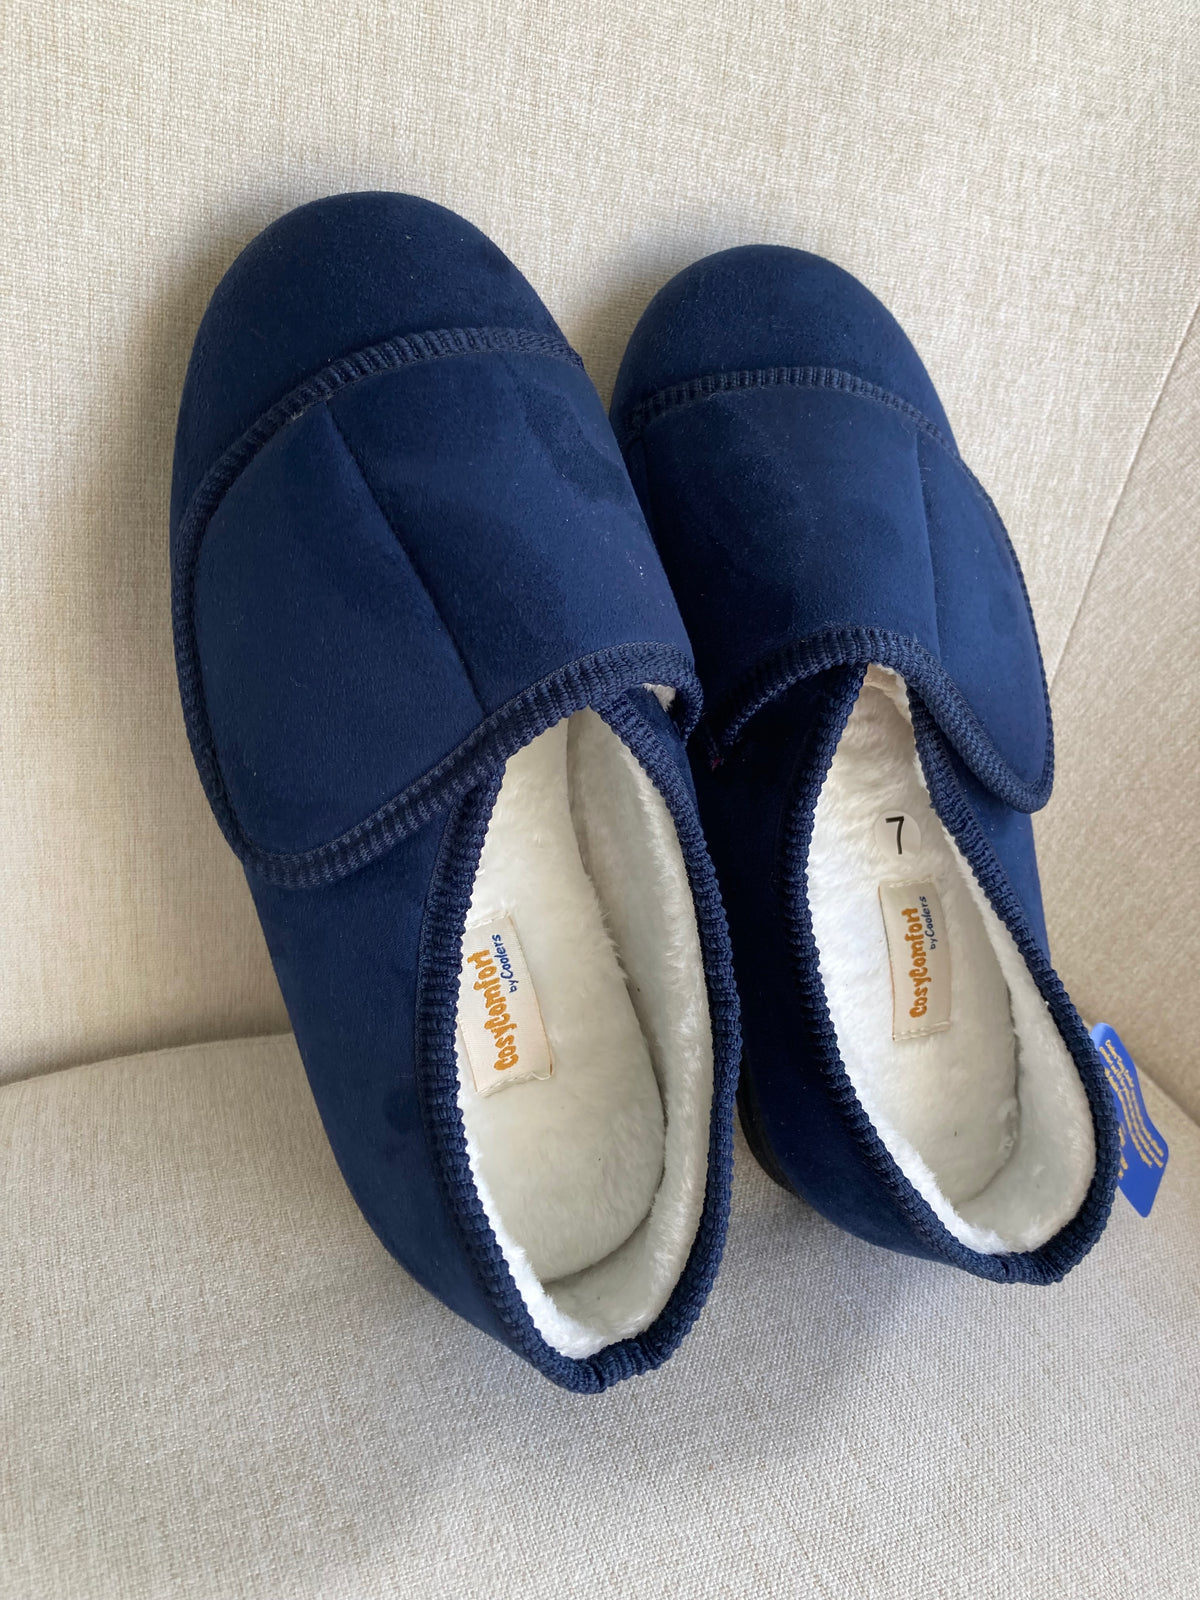 Unisex Wide Fit slippers by COOLERS